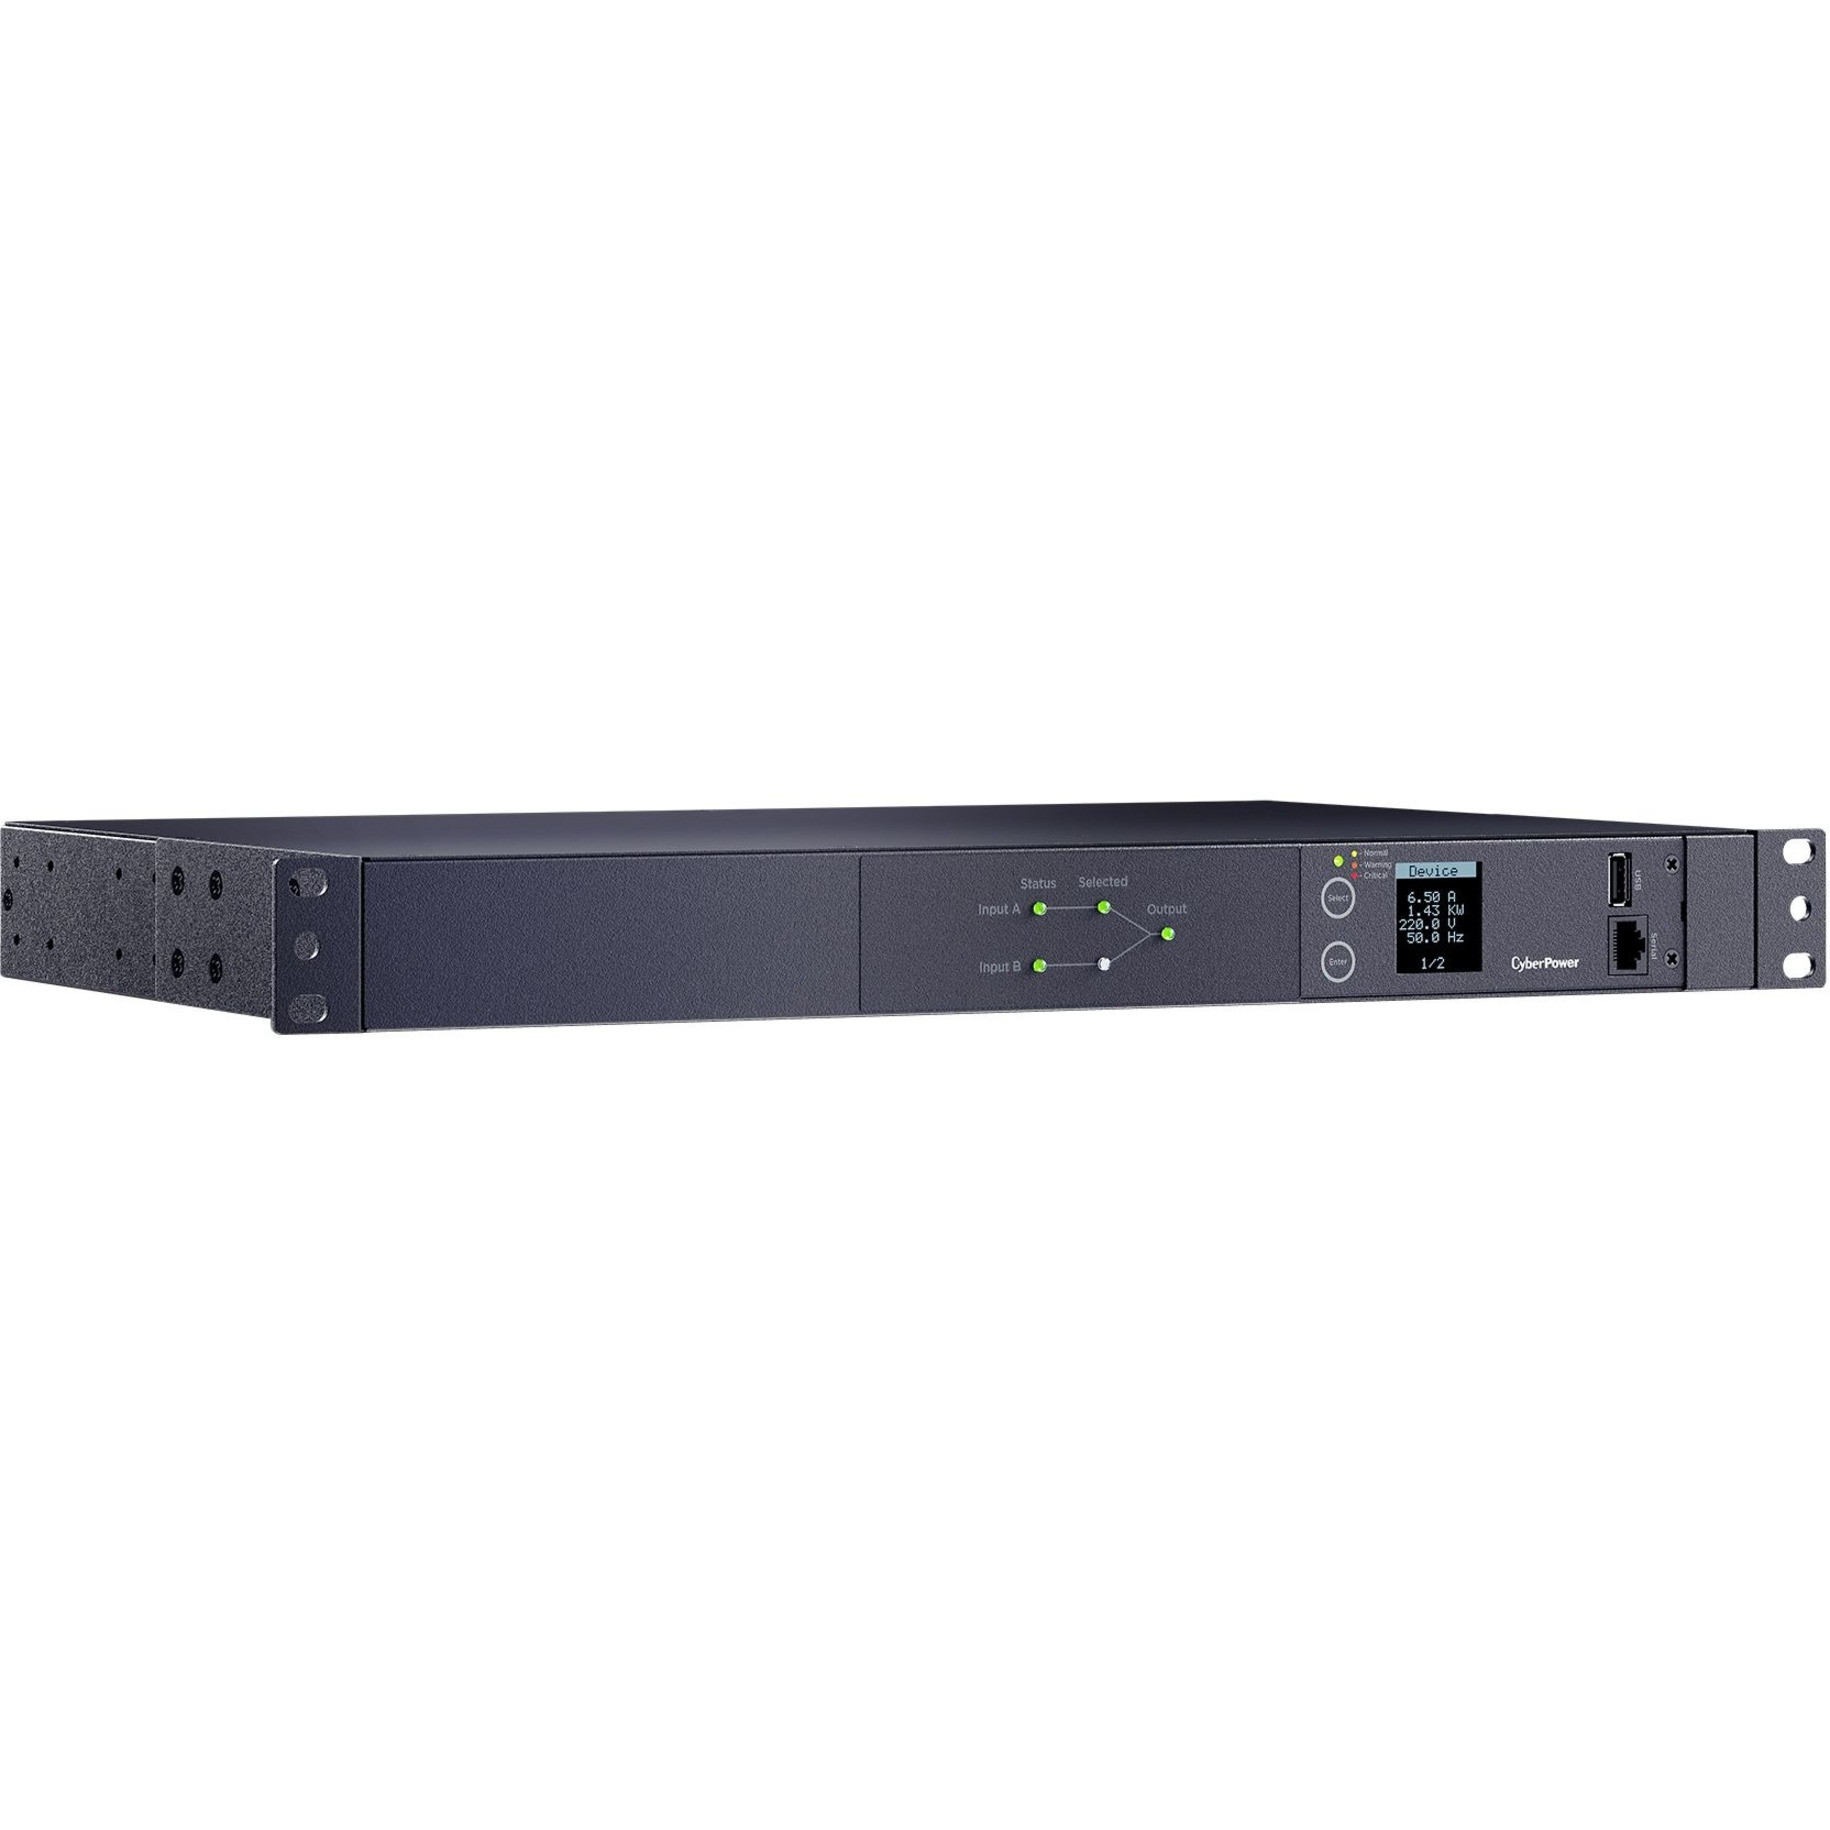 CyberPower PDU24006 Metered ATS PDU – 10-Outlets